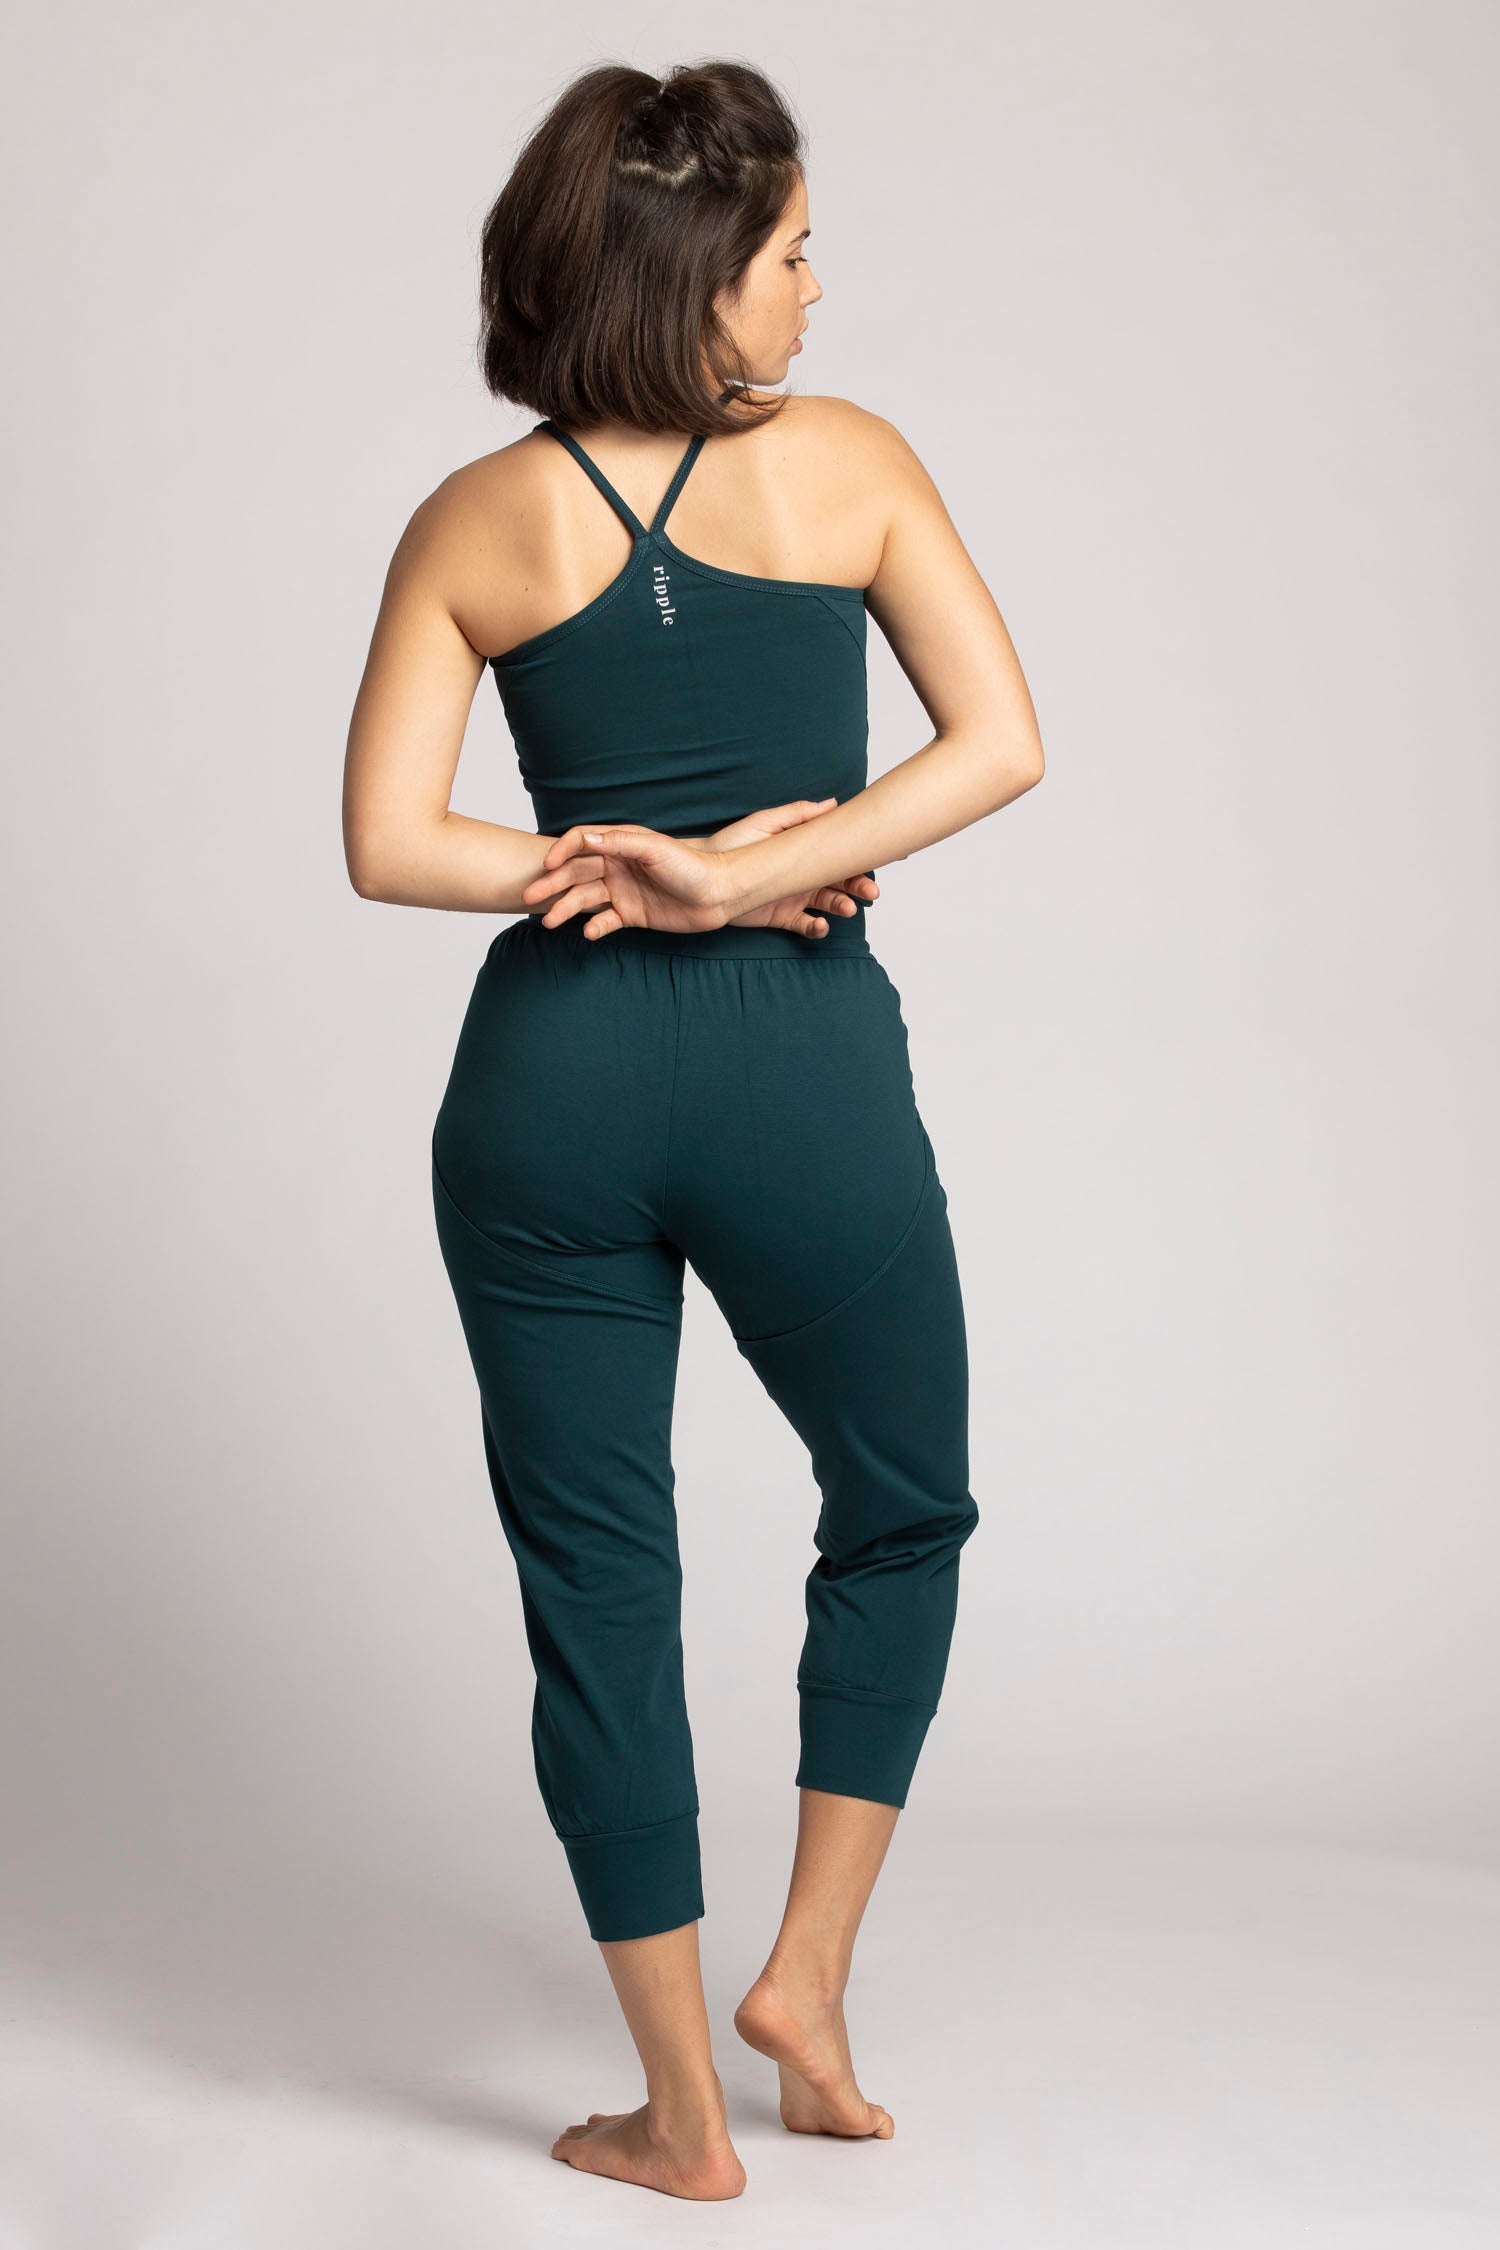 Rust Yoga Jumpsuit with Pockets - Yoga Clothing by Daughters of